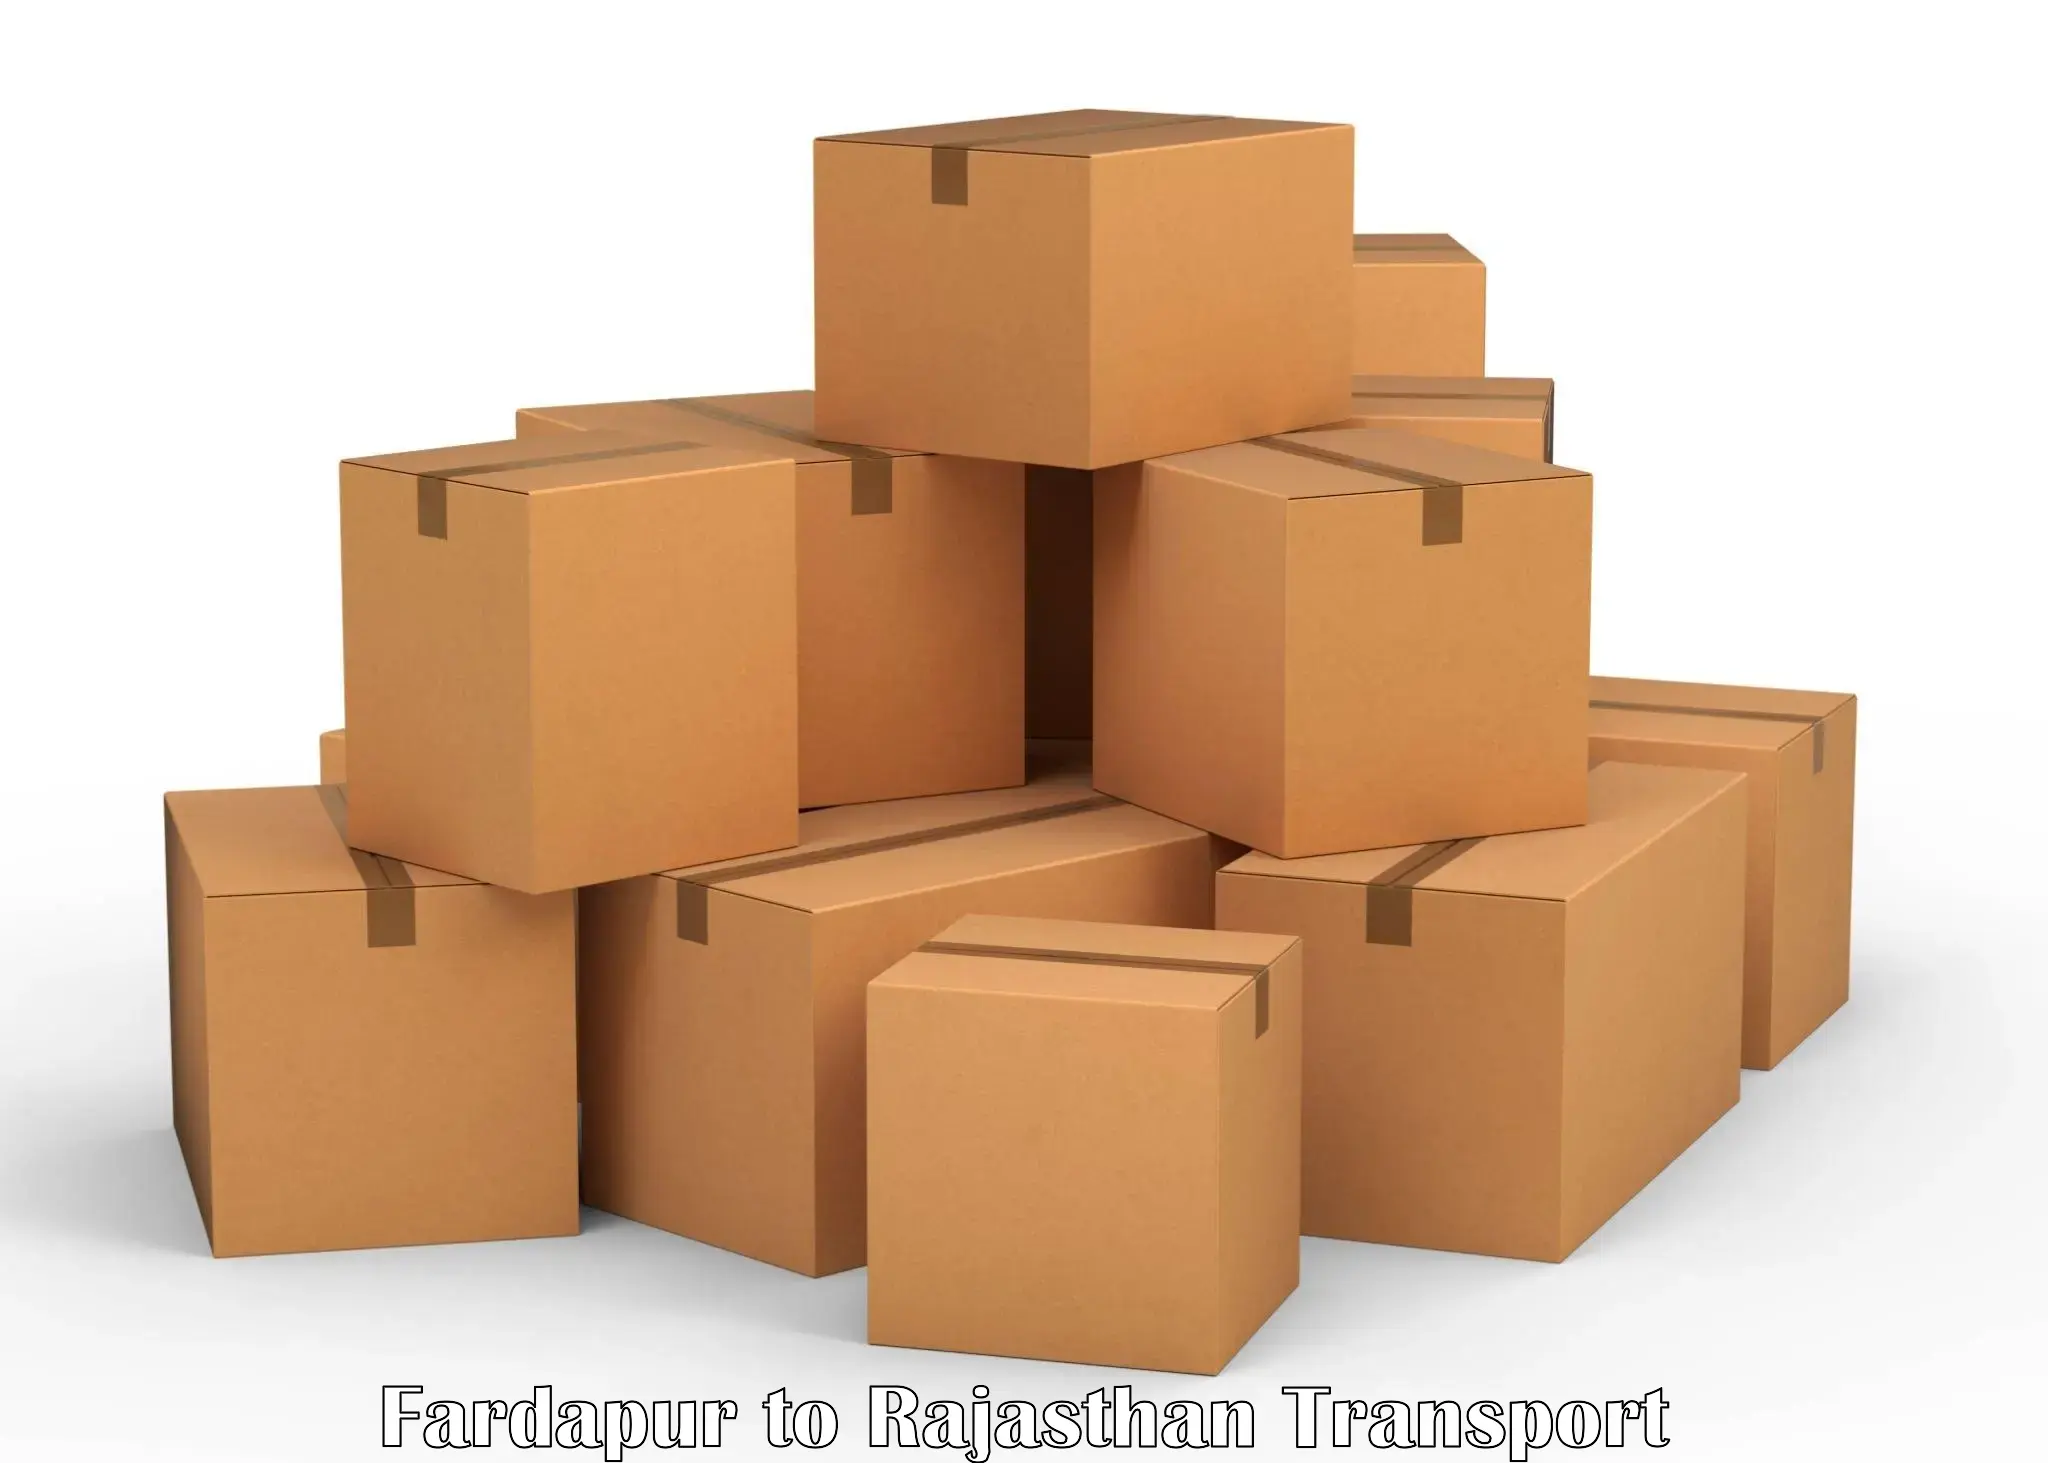 Daily parcel service transport Fardapur to Balesar